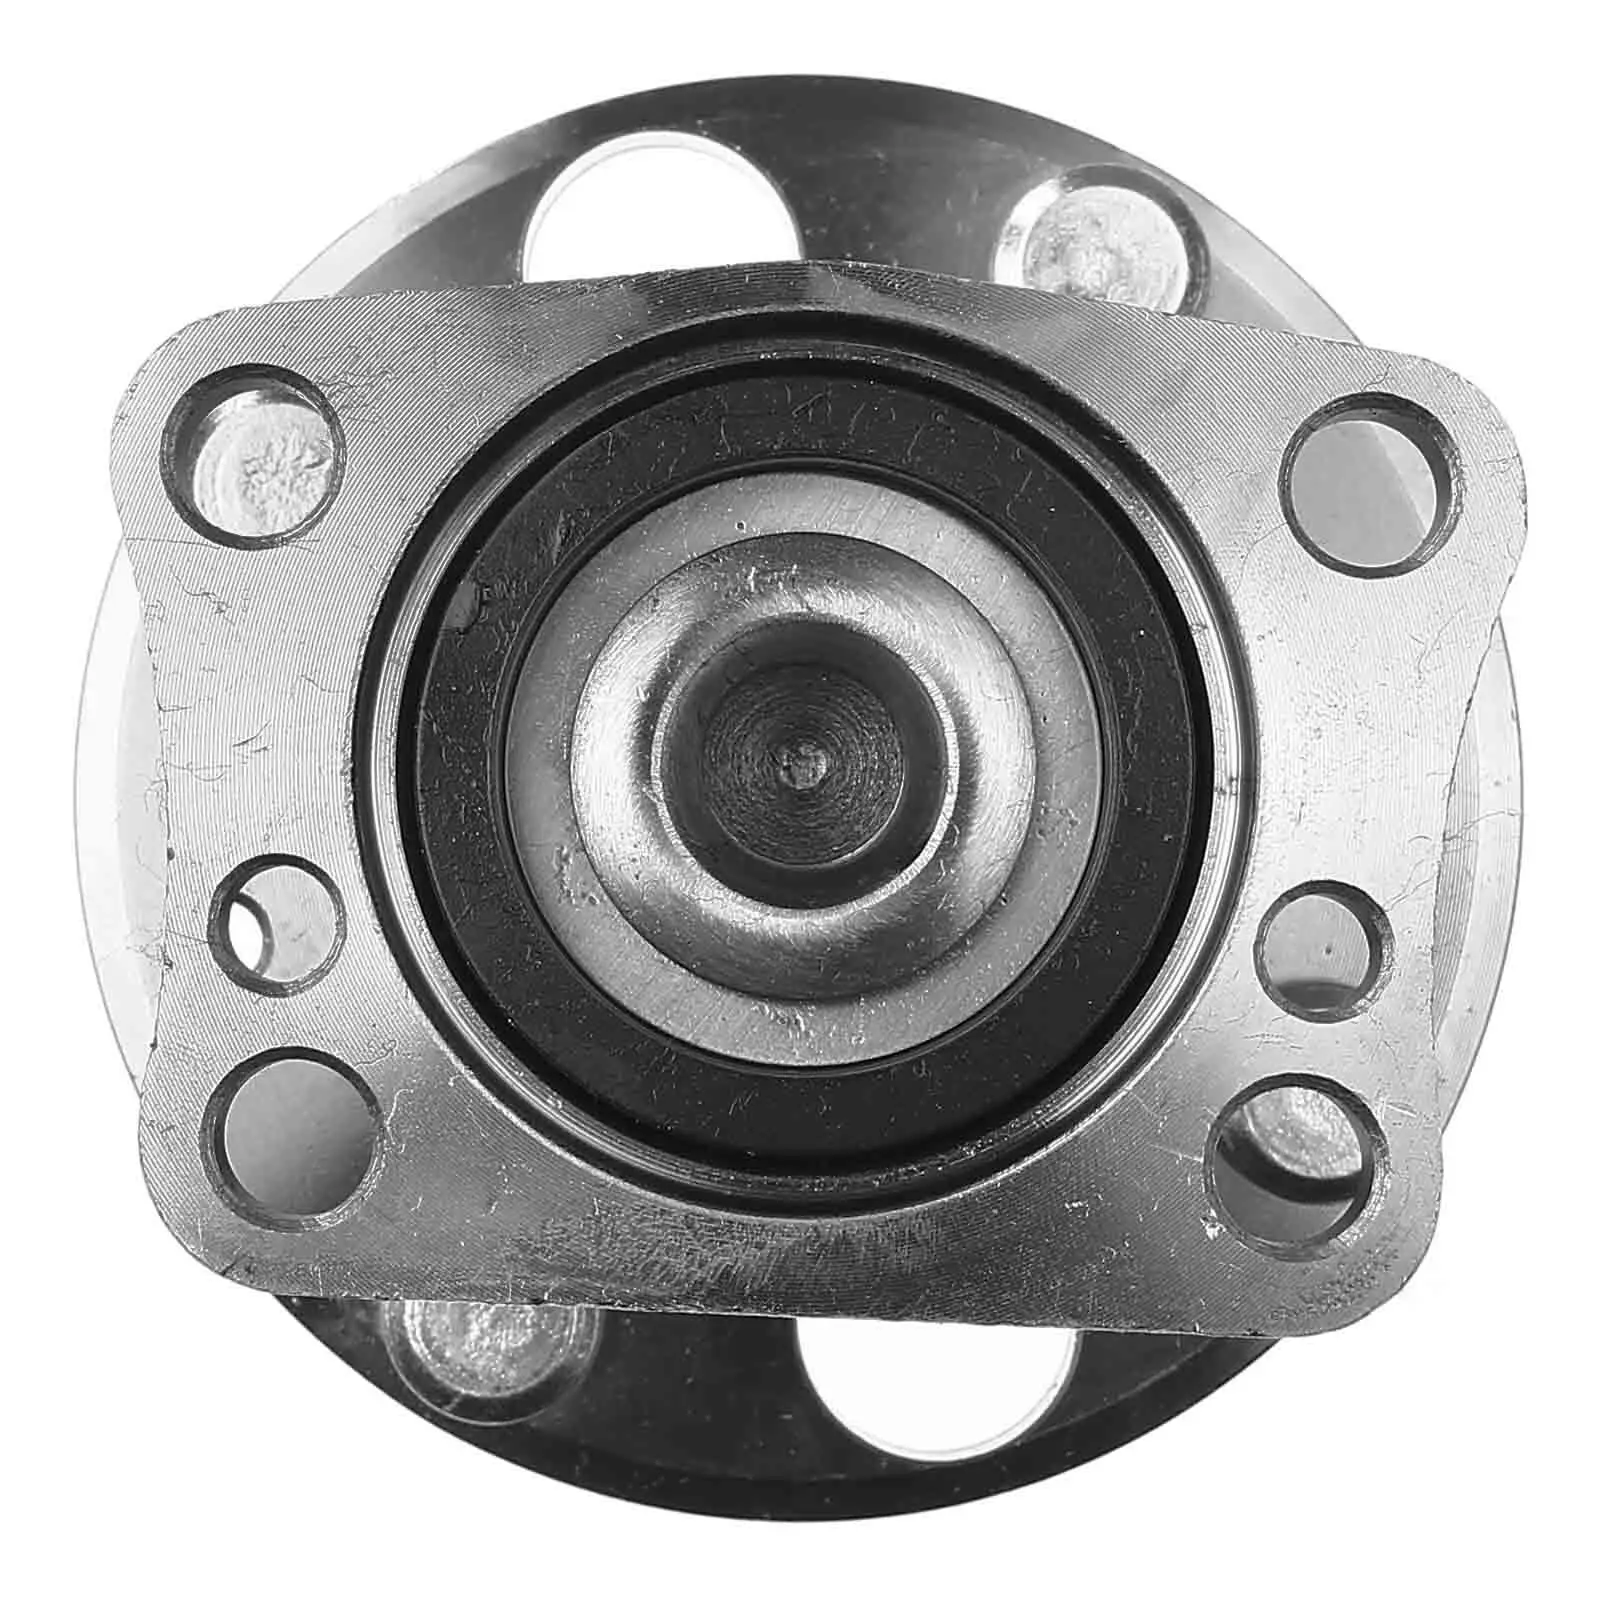 

A1 1x Rear Left or Right Wheel Hub Bearing Assembly for Mazd a2 2011-2014 Hatchback